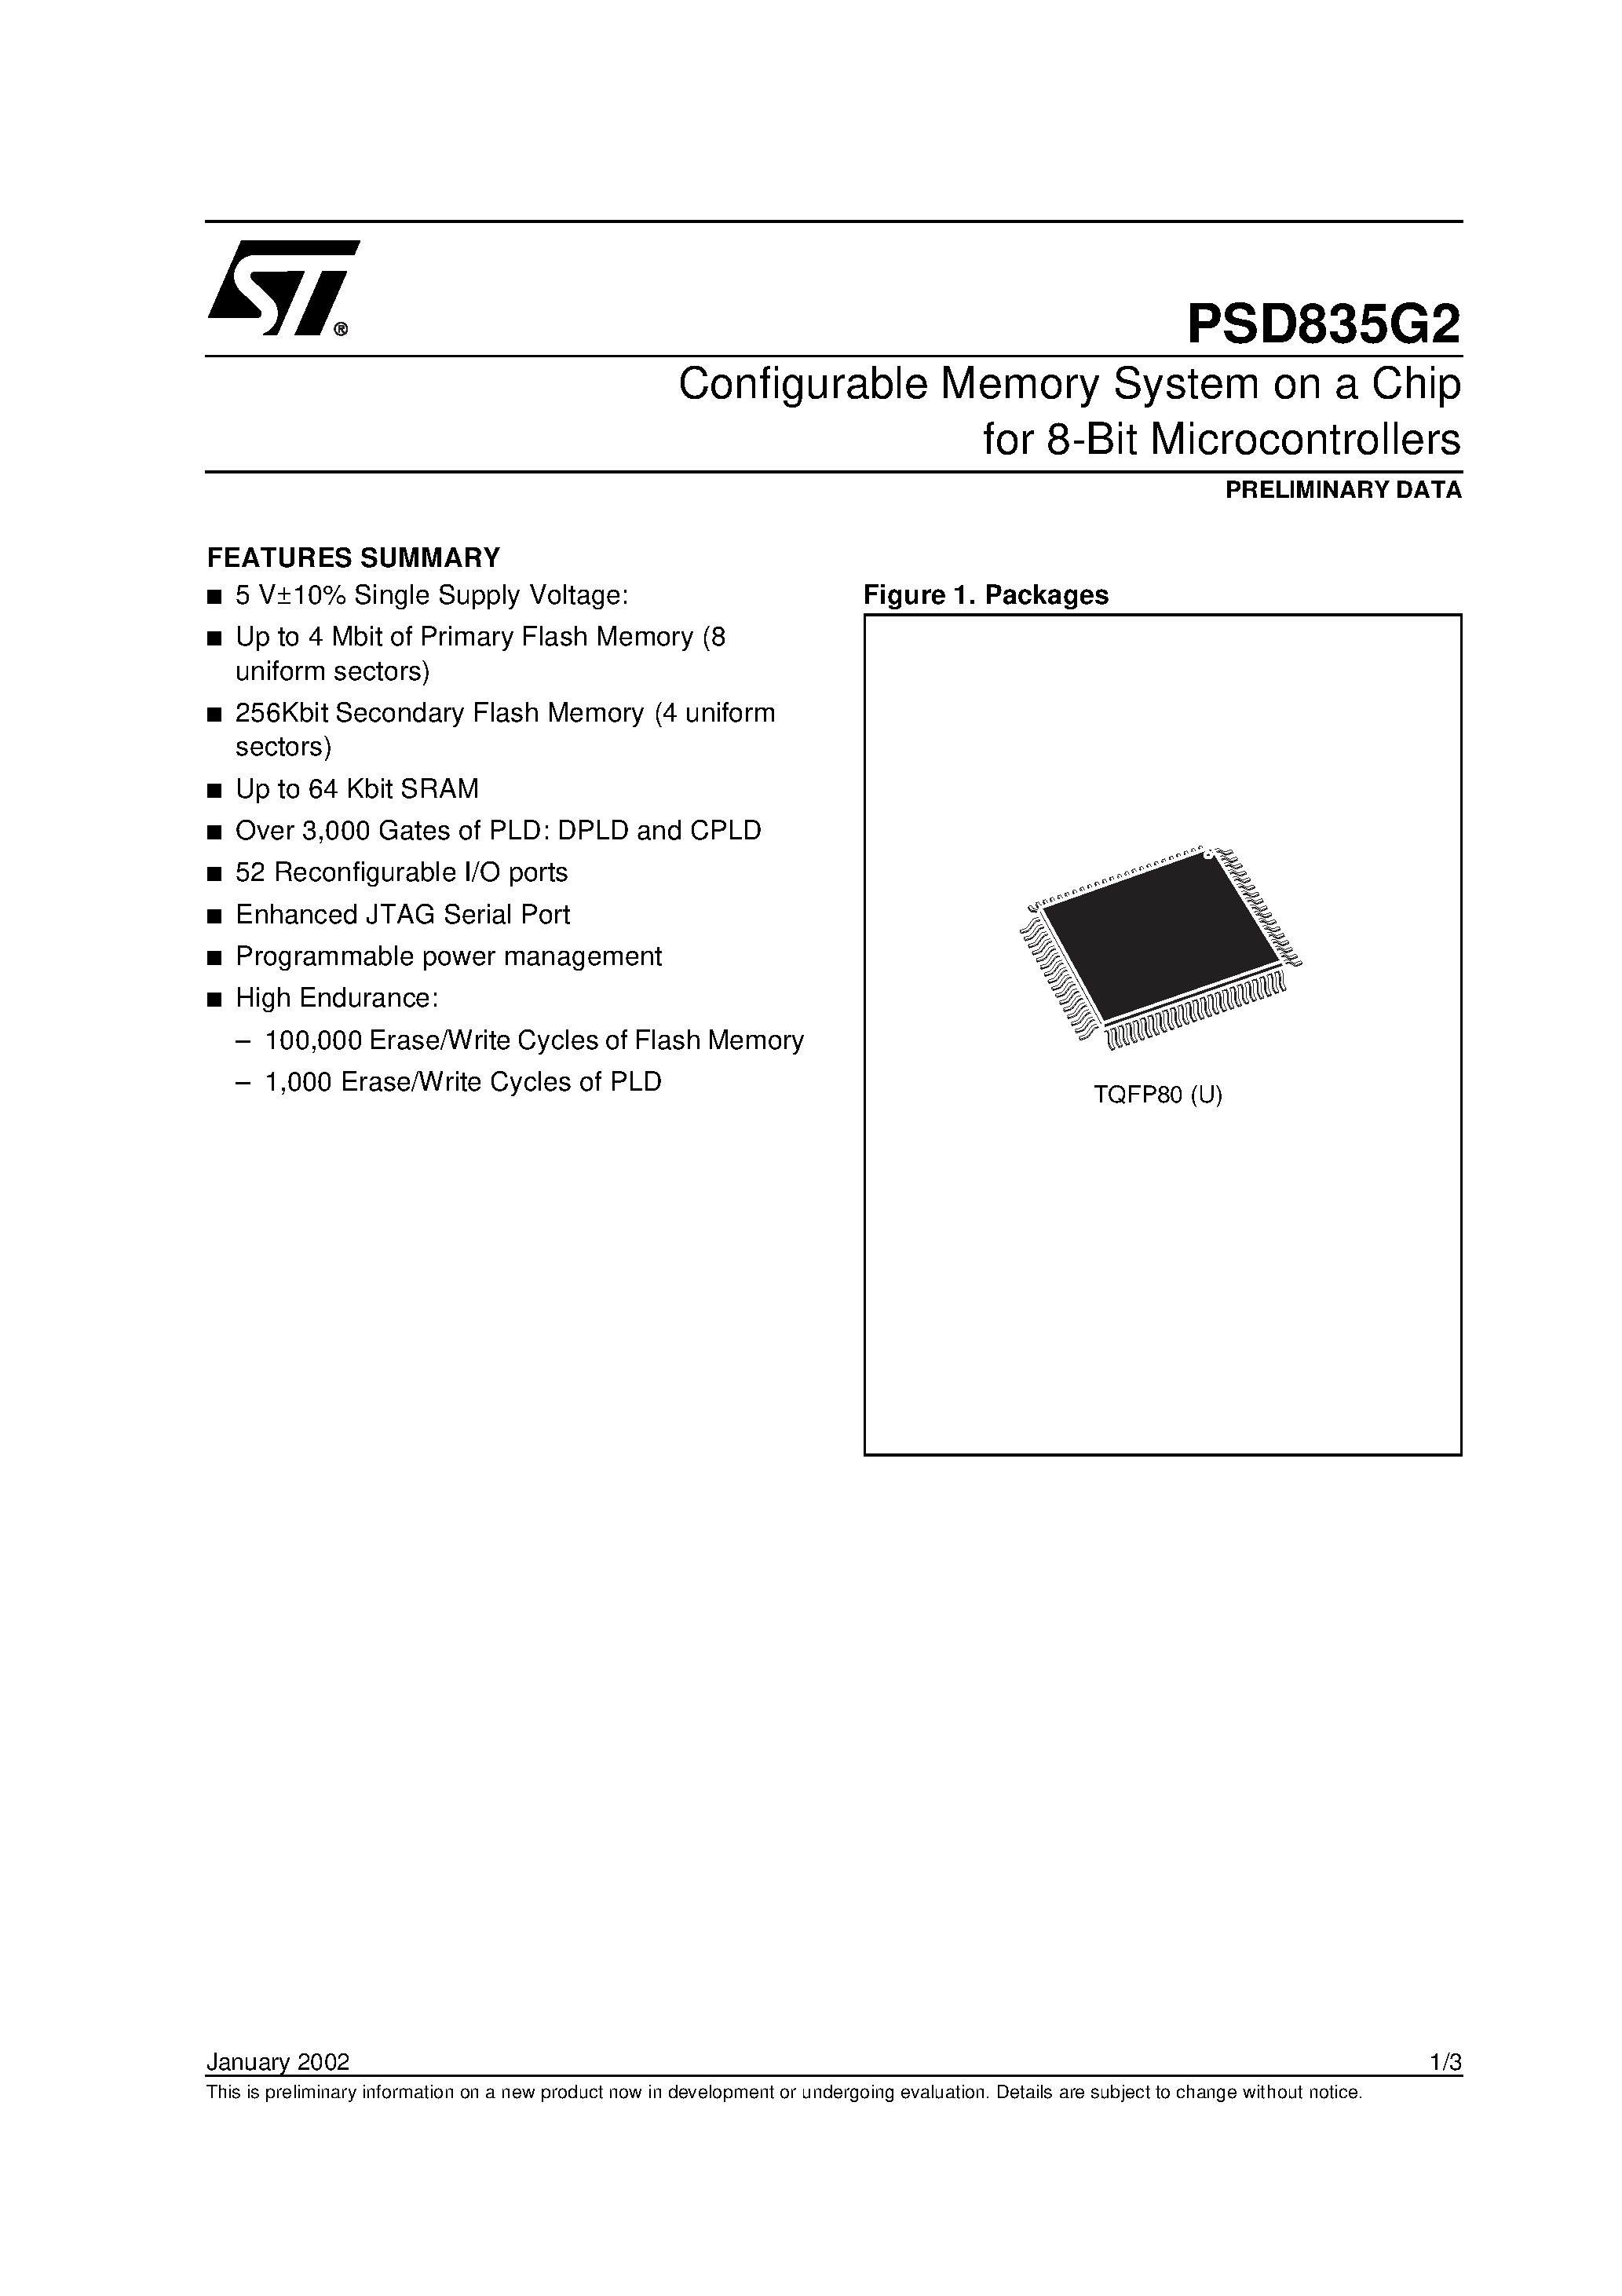 Datasheet PSD835F2-A-90MI - Configurable Memory System on a Chip for 8-Bit Microcontrollers page 1